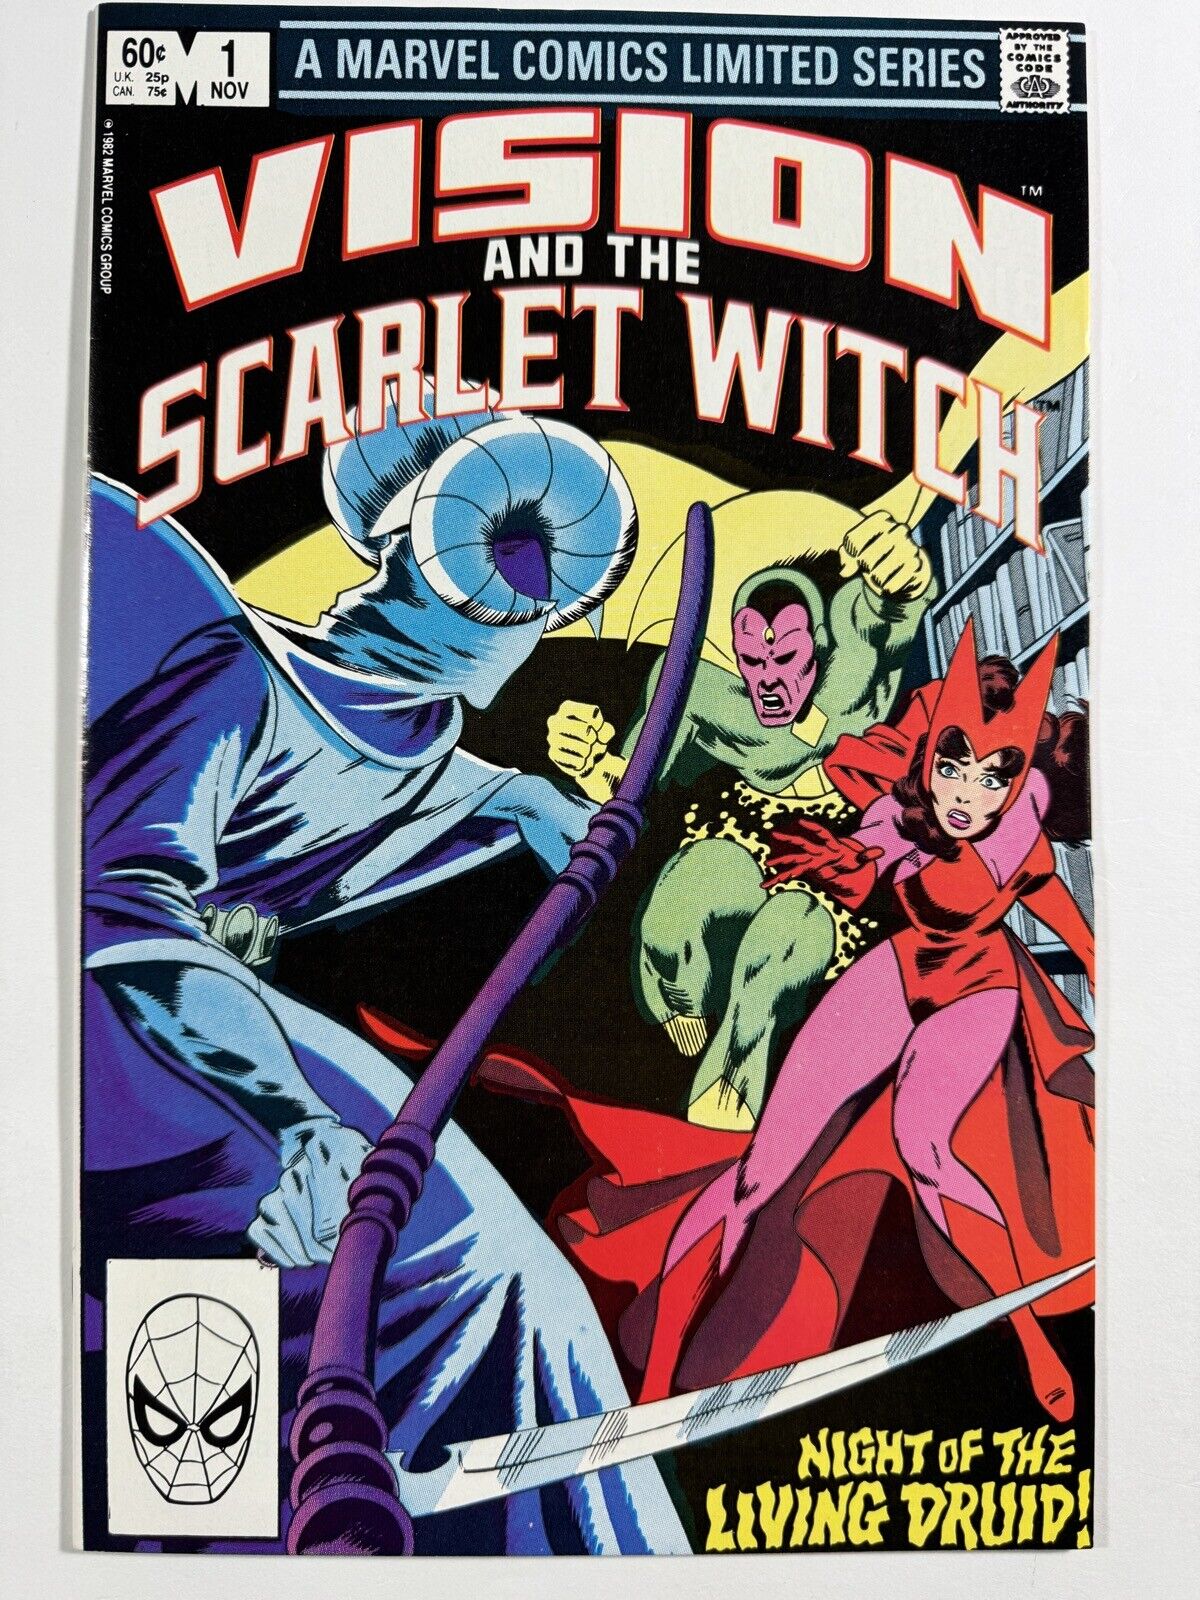 VISION AND THE SCARLET WITCH #1 Living Druid VERY HIGH-GRADE 1983 MARVEL COMICS